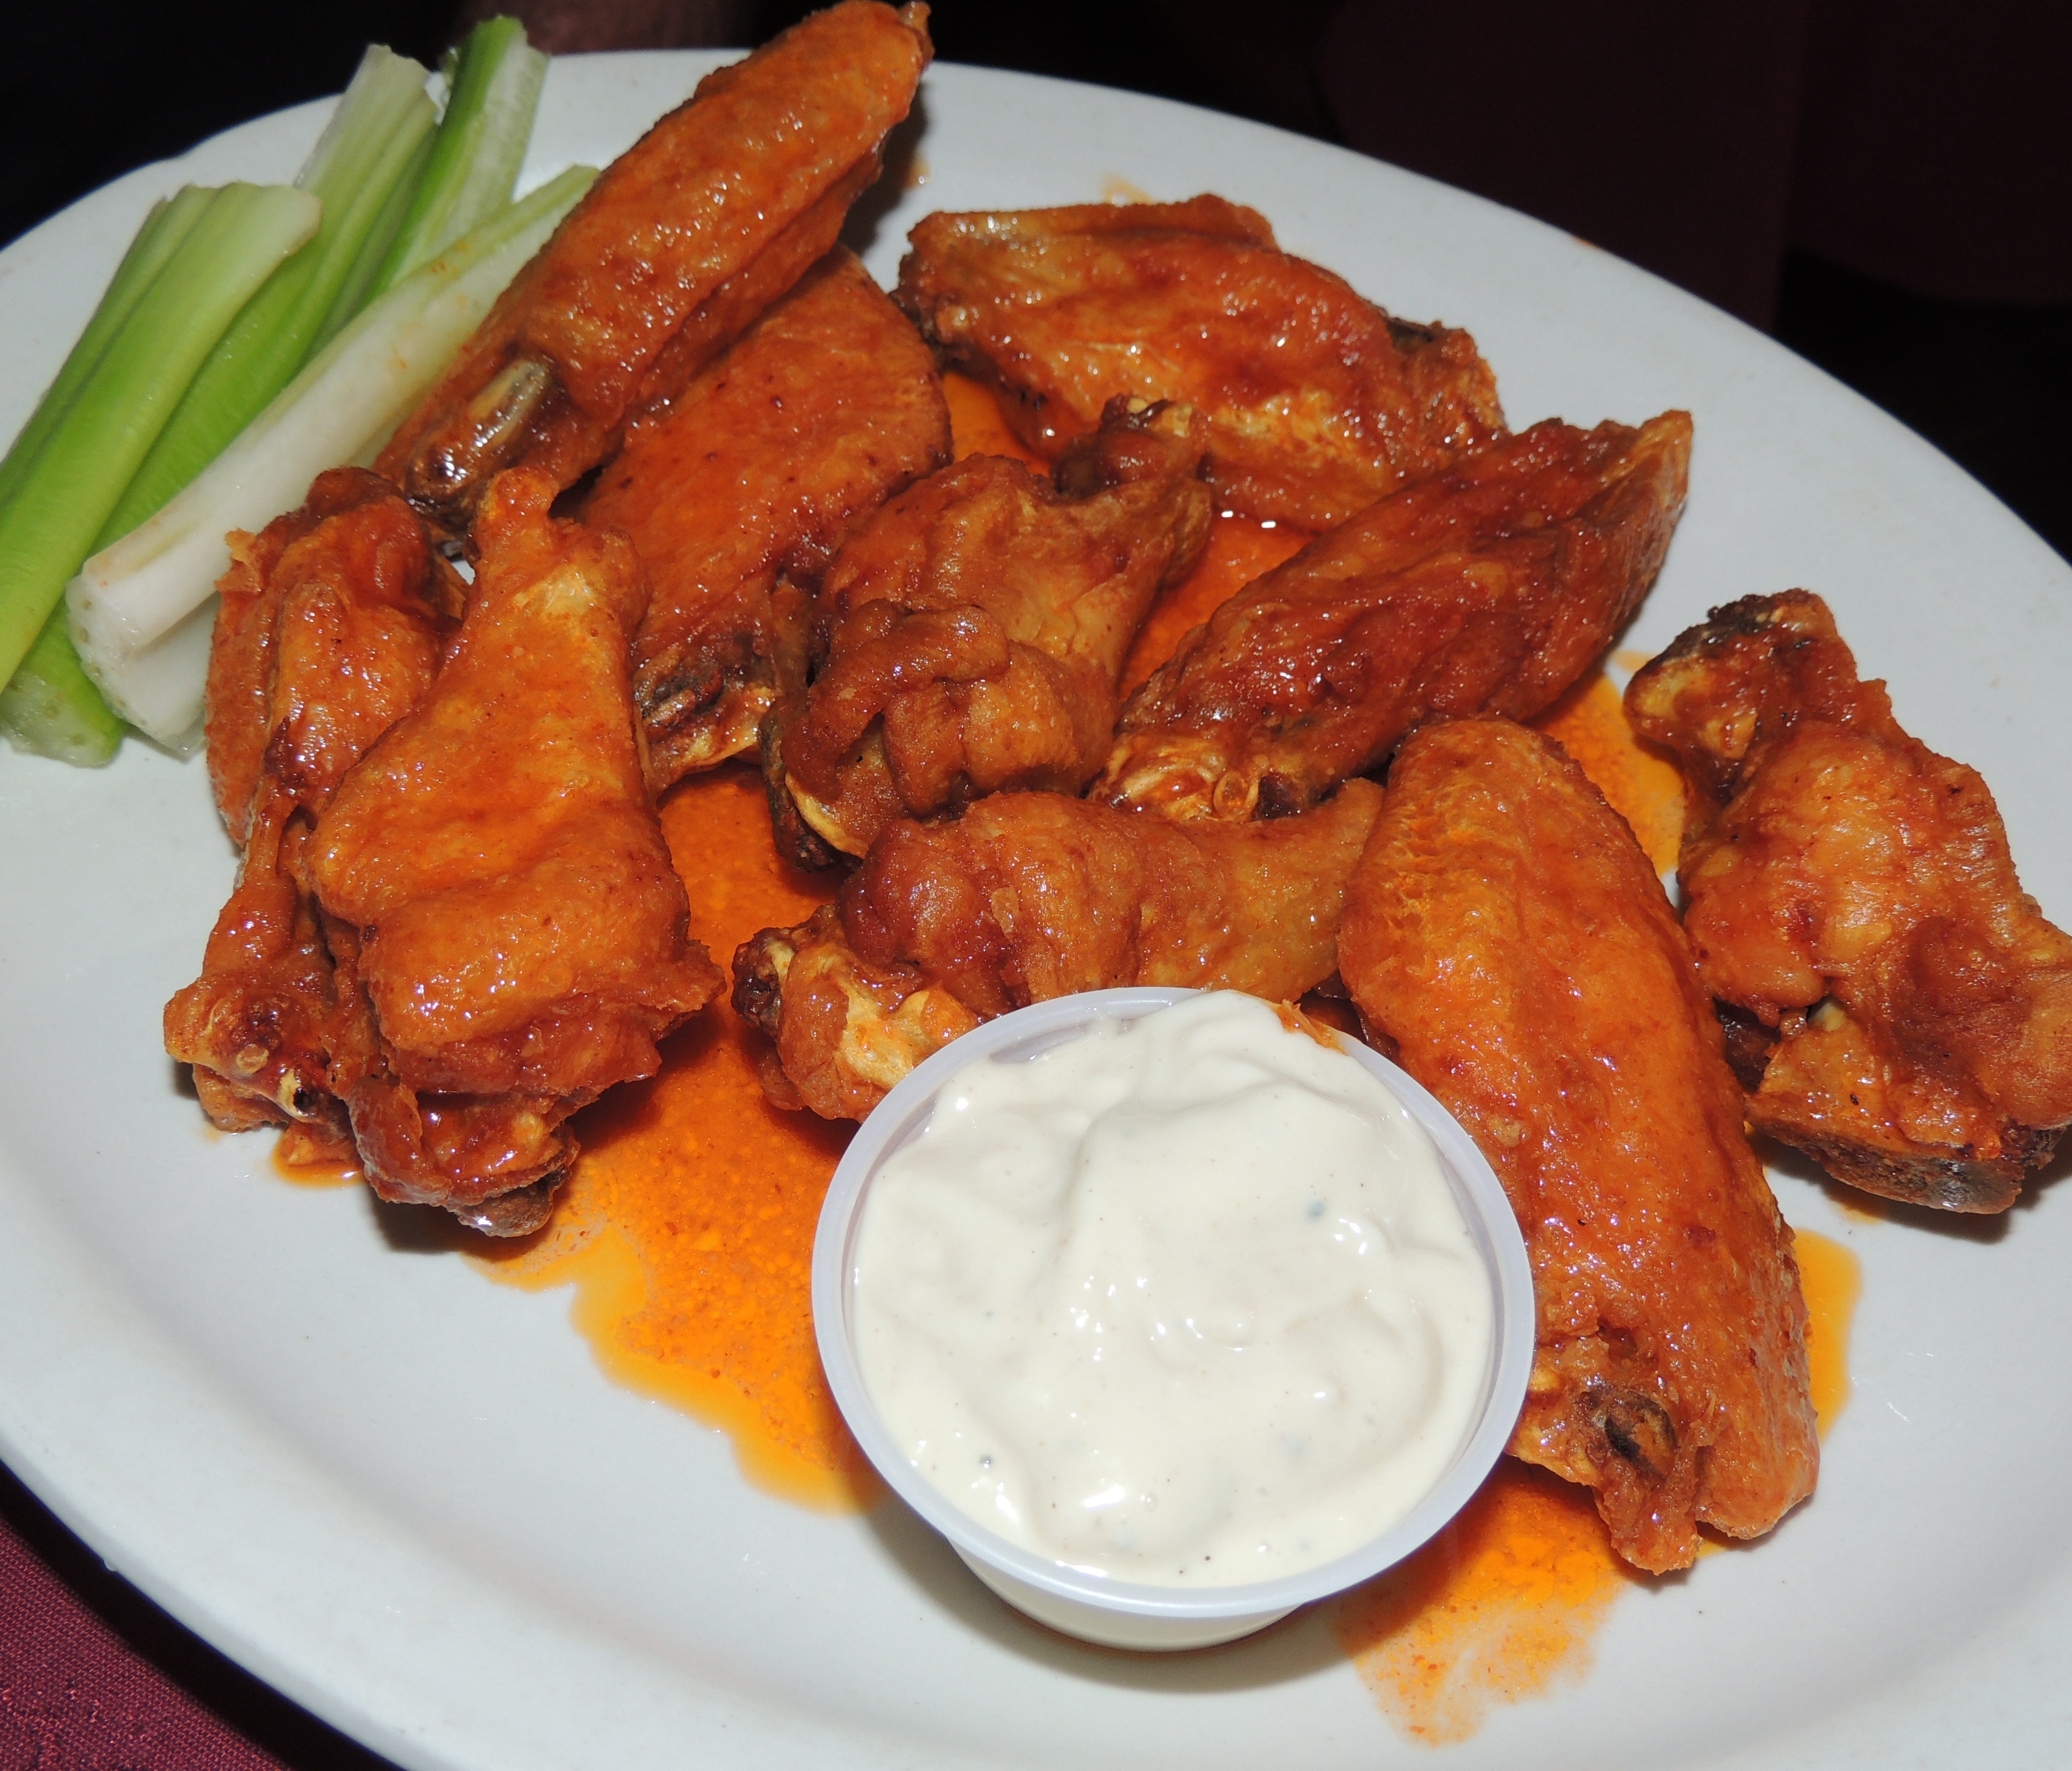 The original Buffalo hot wing is served at Anchor Bar, where the dish was invented in 1964. These are medium, the most popular flavor in the city.